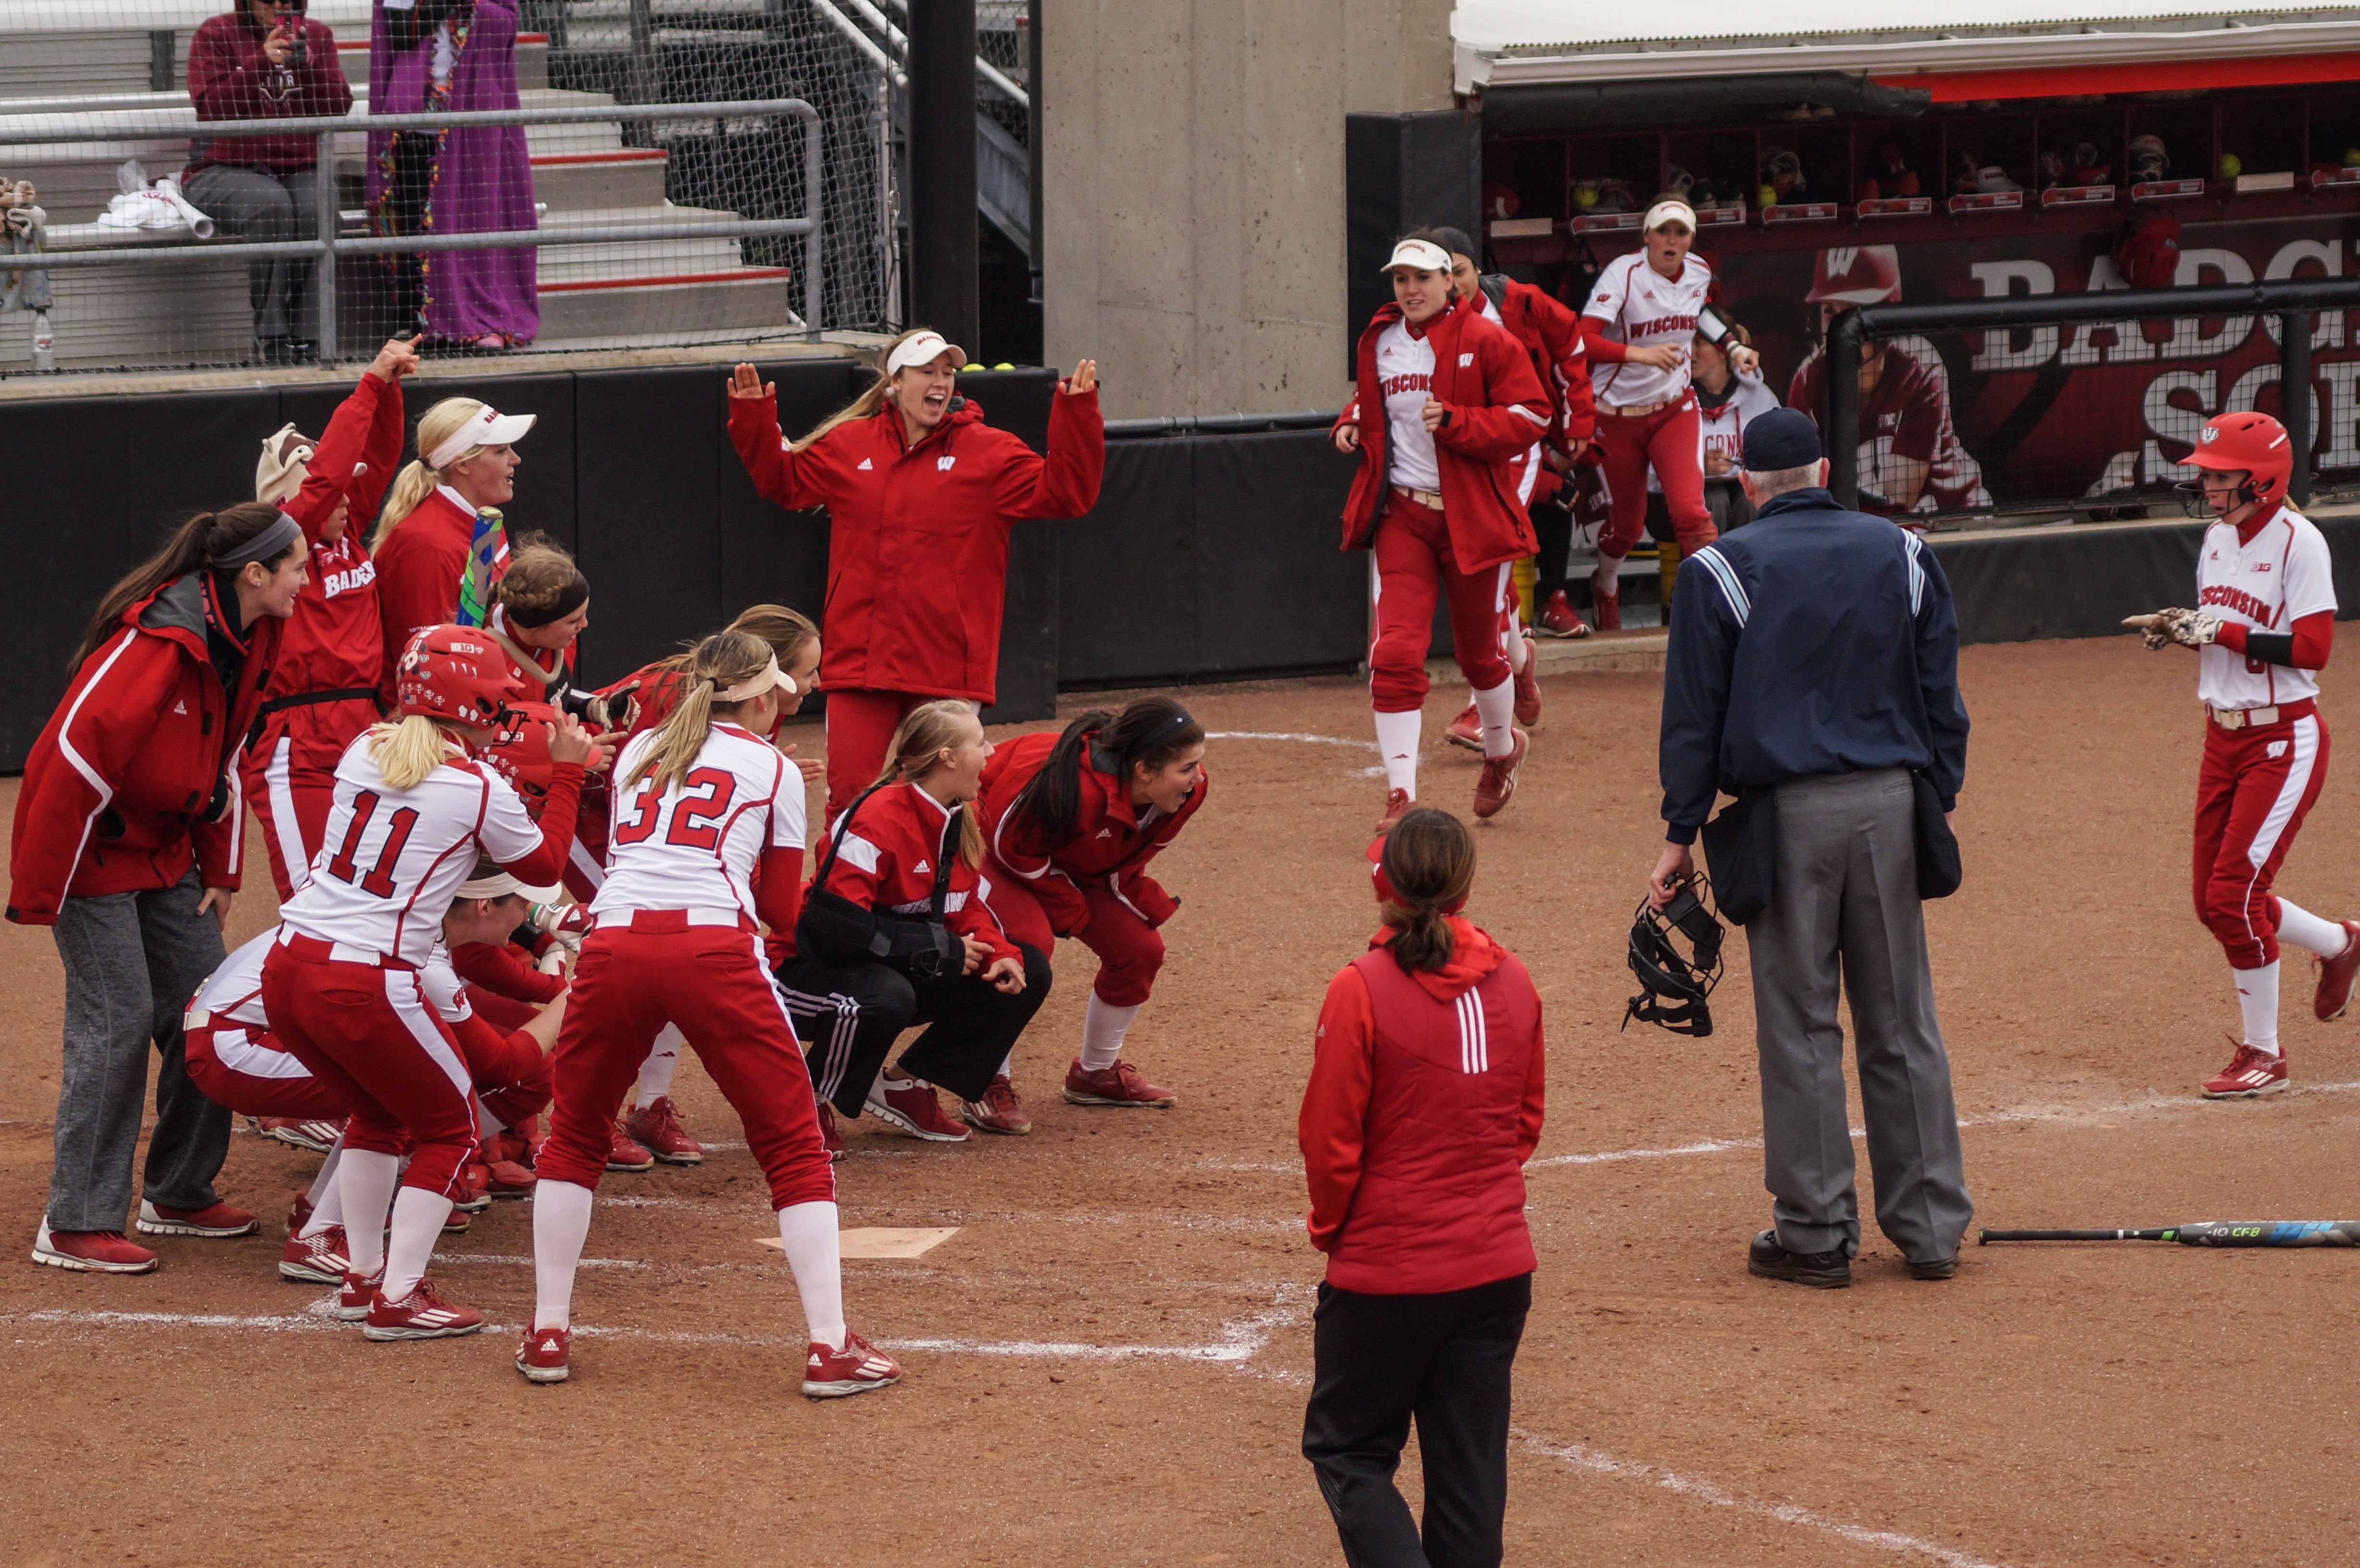 Softball Badgers upset two ranked teams in Arizona to earn ranking of